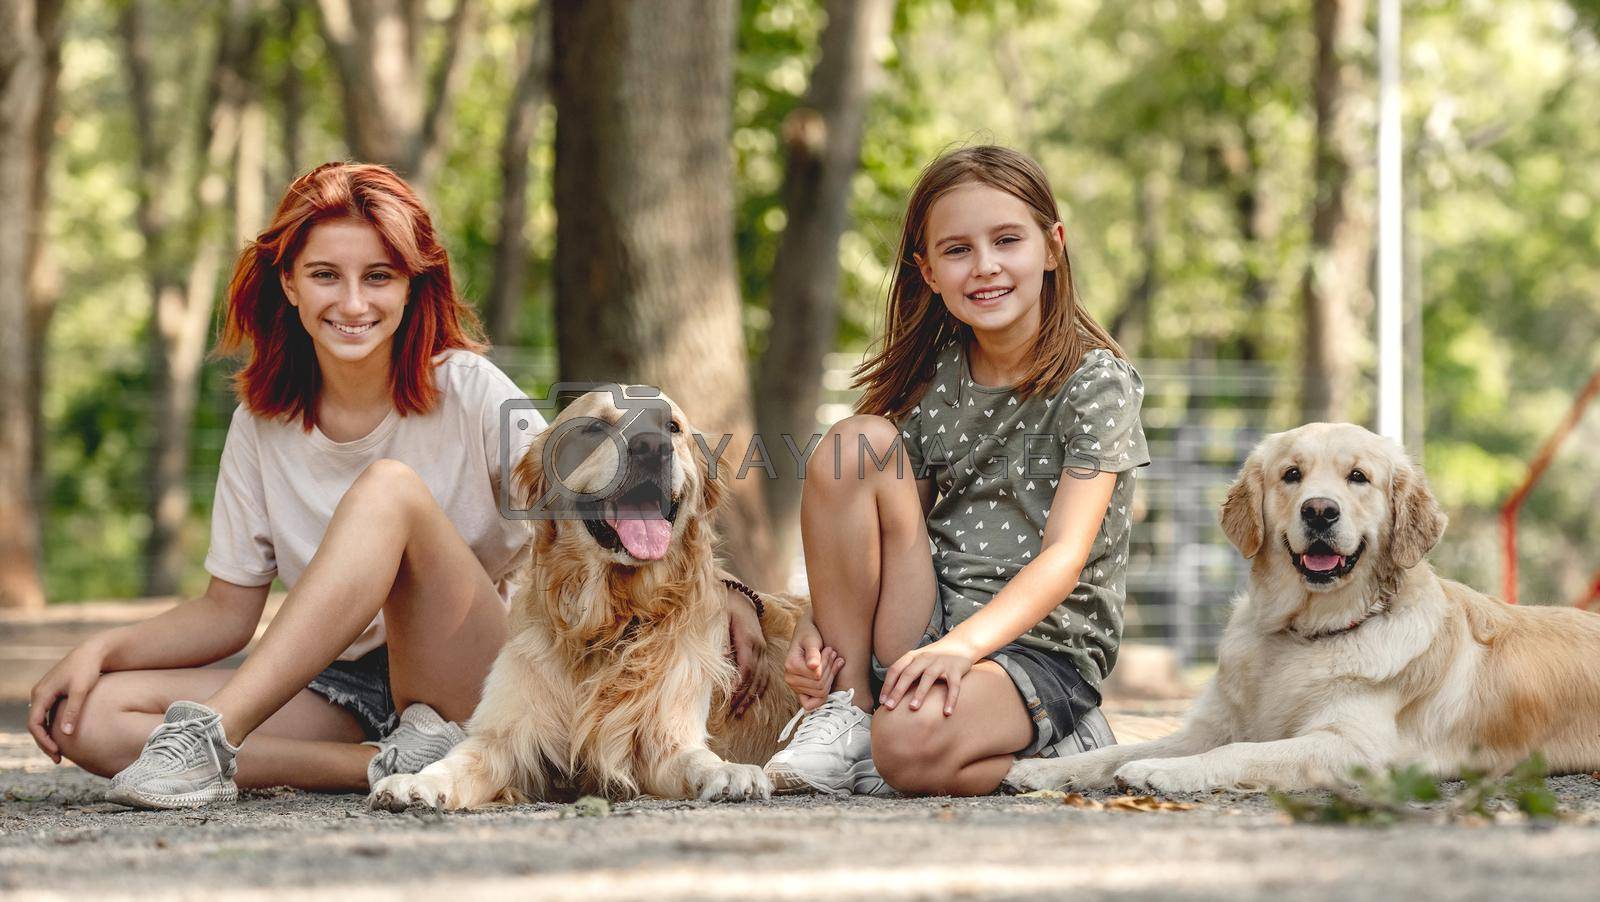 Girls with golden retriever dogs sitting in the park. Sisters with doggy pets outdoors looking at camera